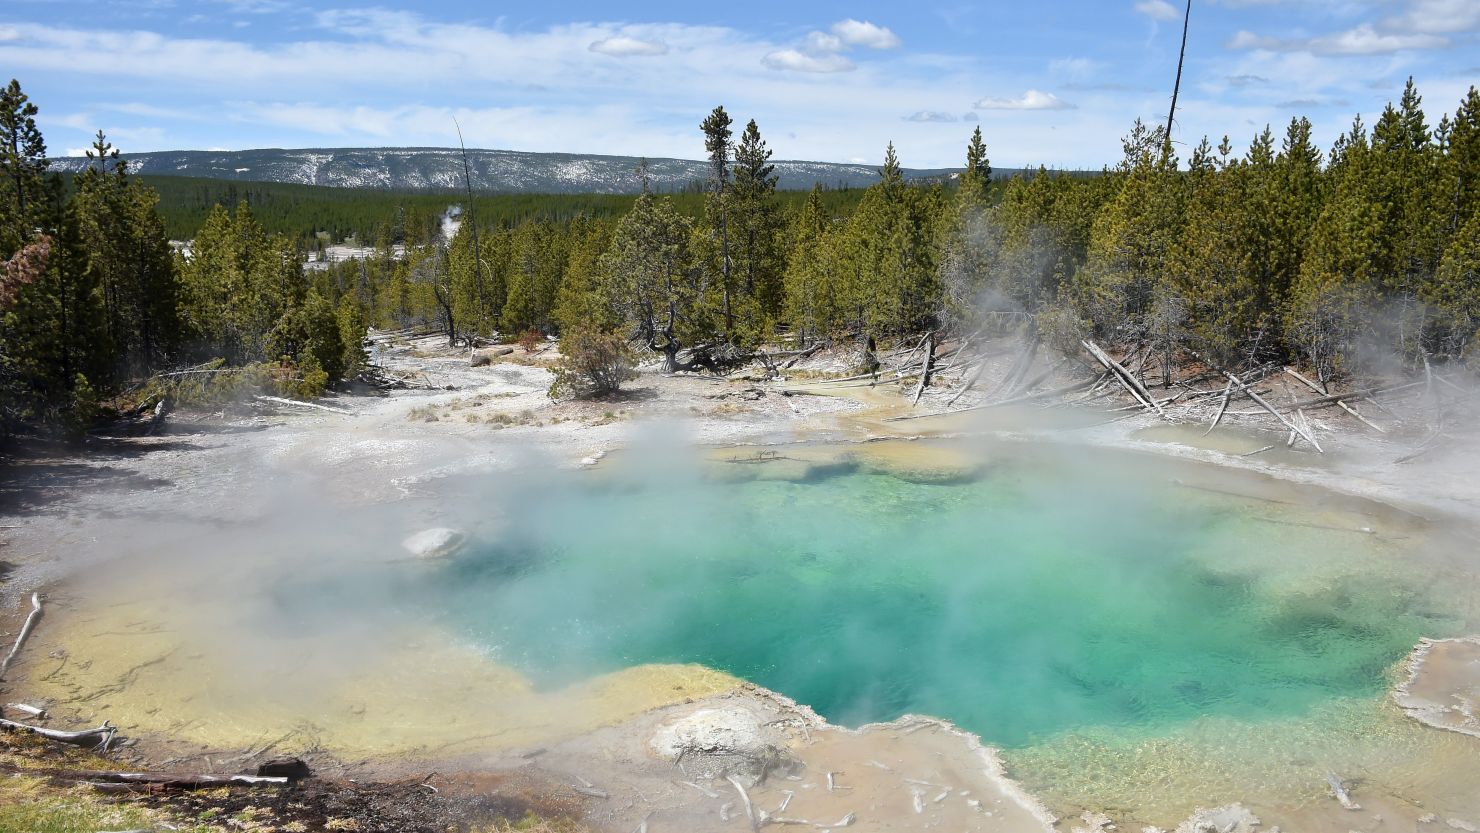 A view of a hot spring at the Norris Geyser Basin at Yellowstone National Park on May 12, 2016.